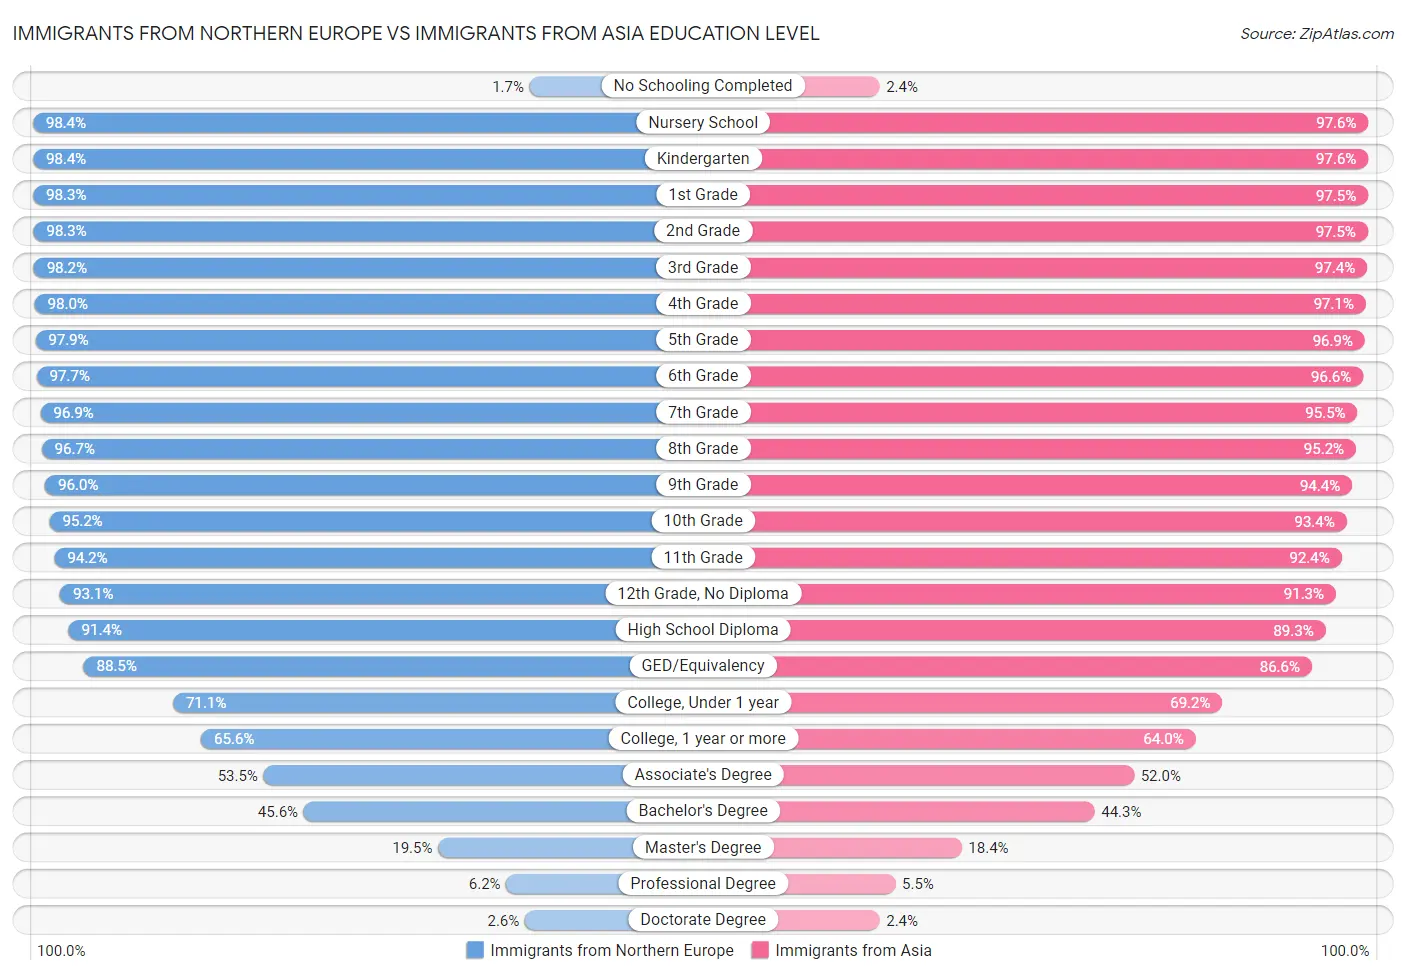 Immigrants from Northern Europe vs Immigrants from Asia Education Level